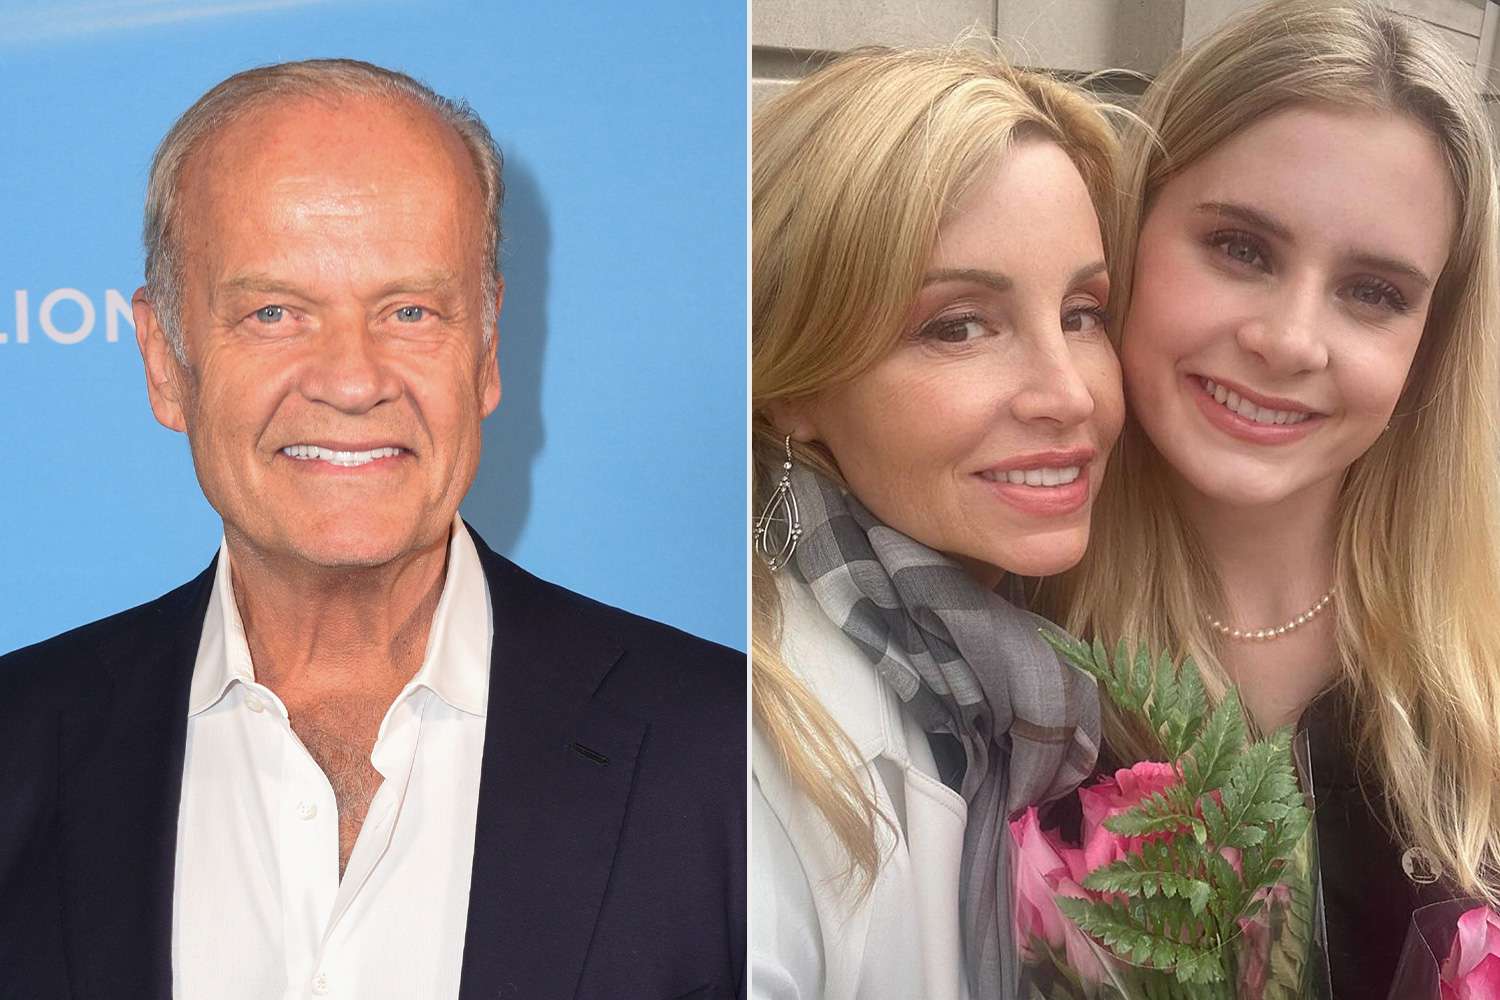 Kelsey Grammer and Ex Camille's Daughter Mason Graduates from College: 'So Proud'